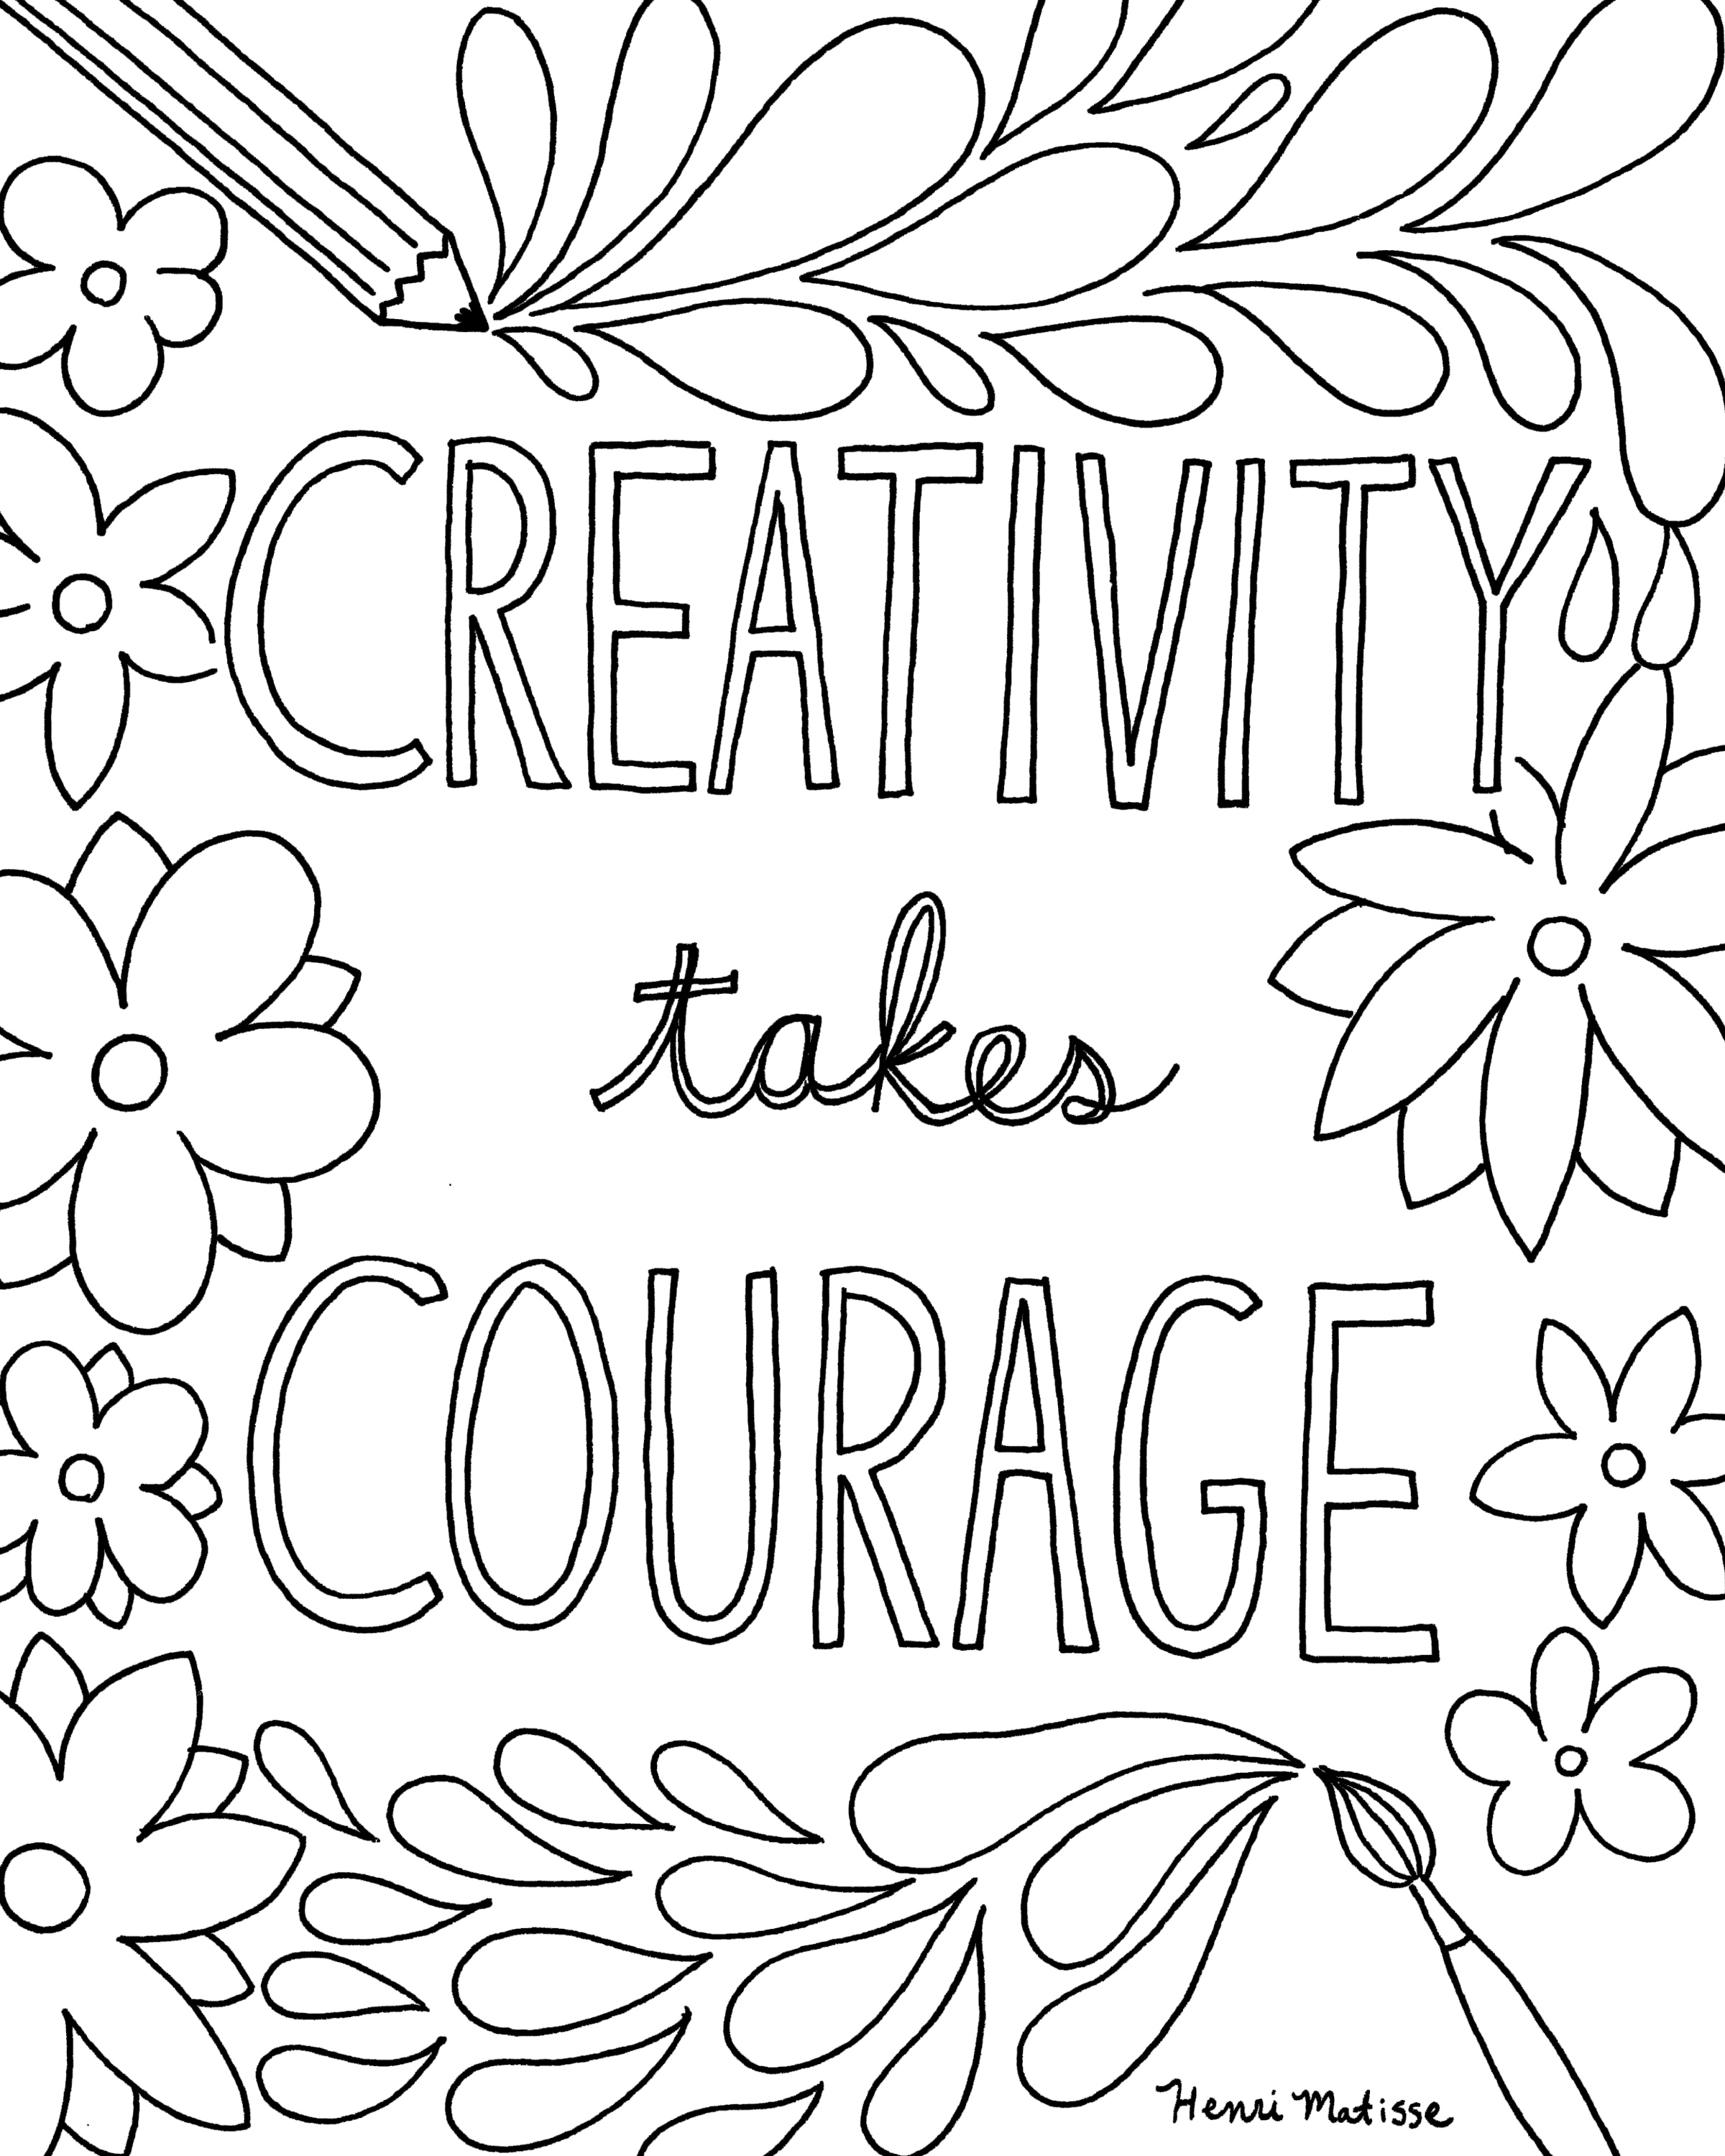 Download Quote Coloring Pages For Adults And Teens Best Coloring Pages For Kids